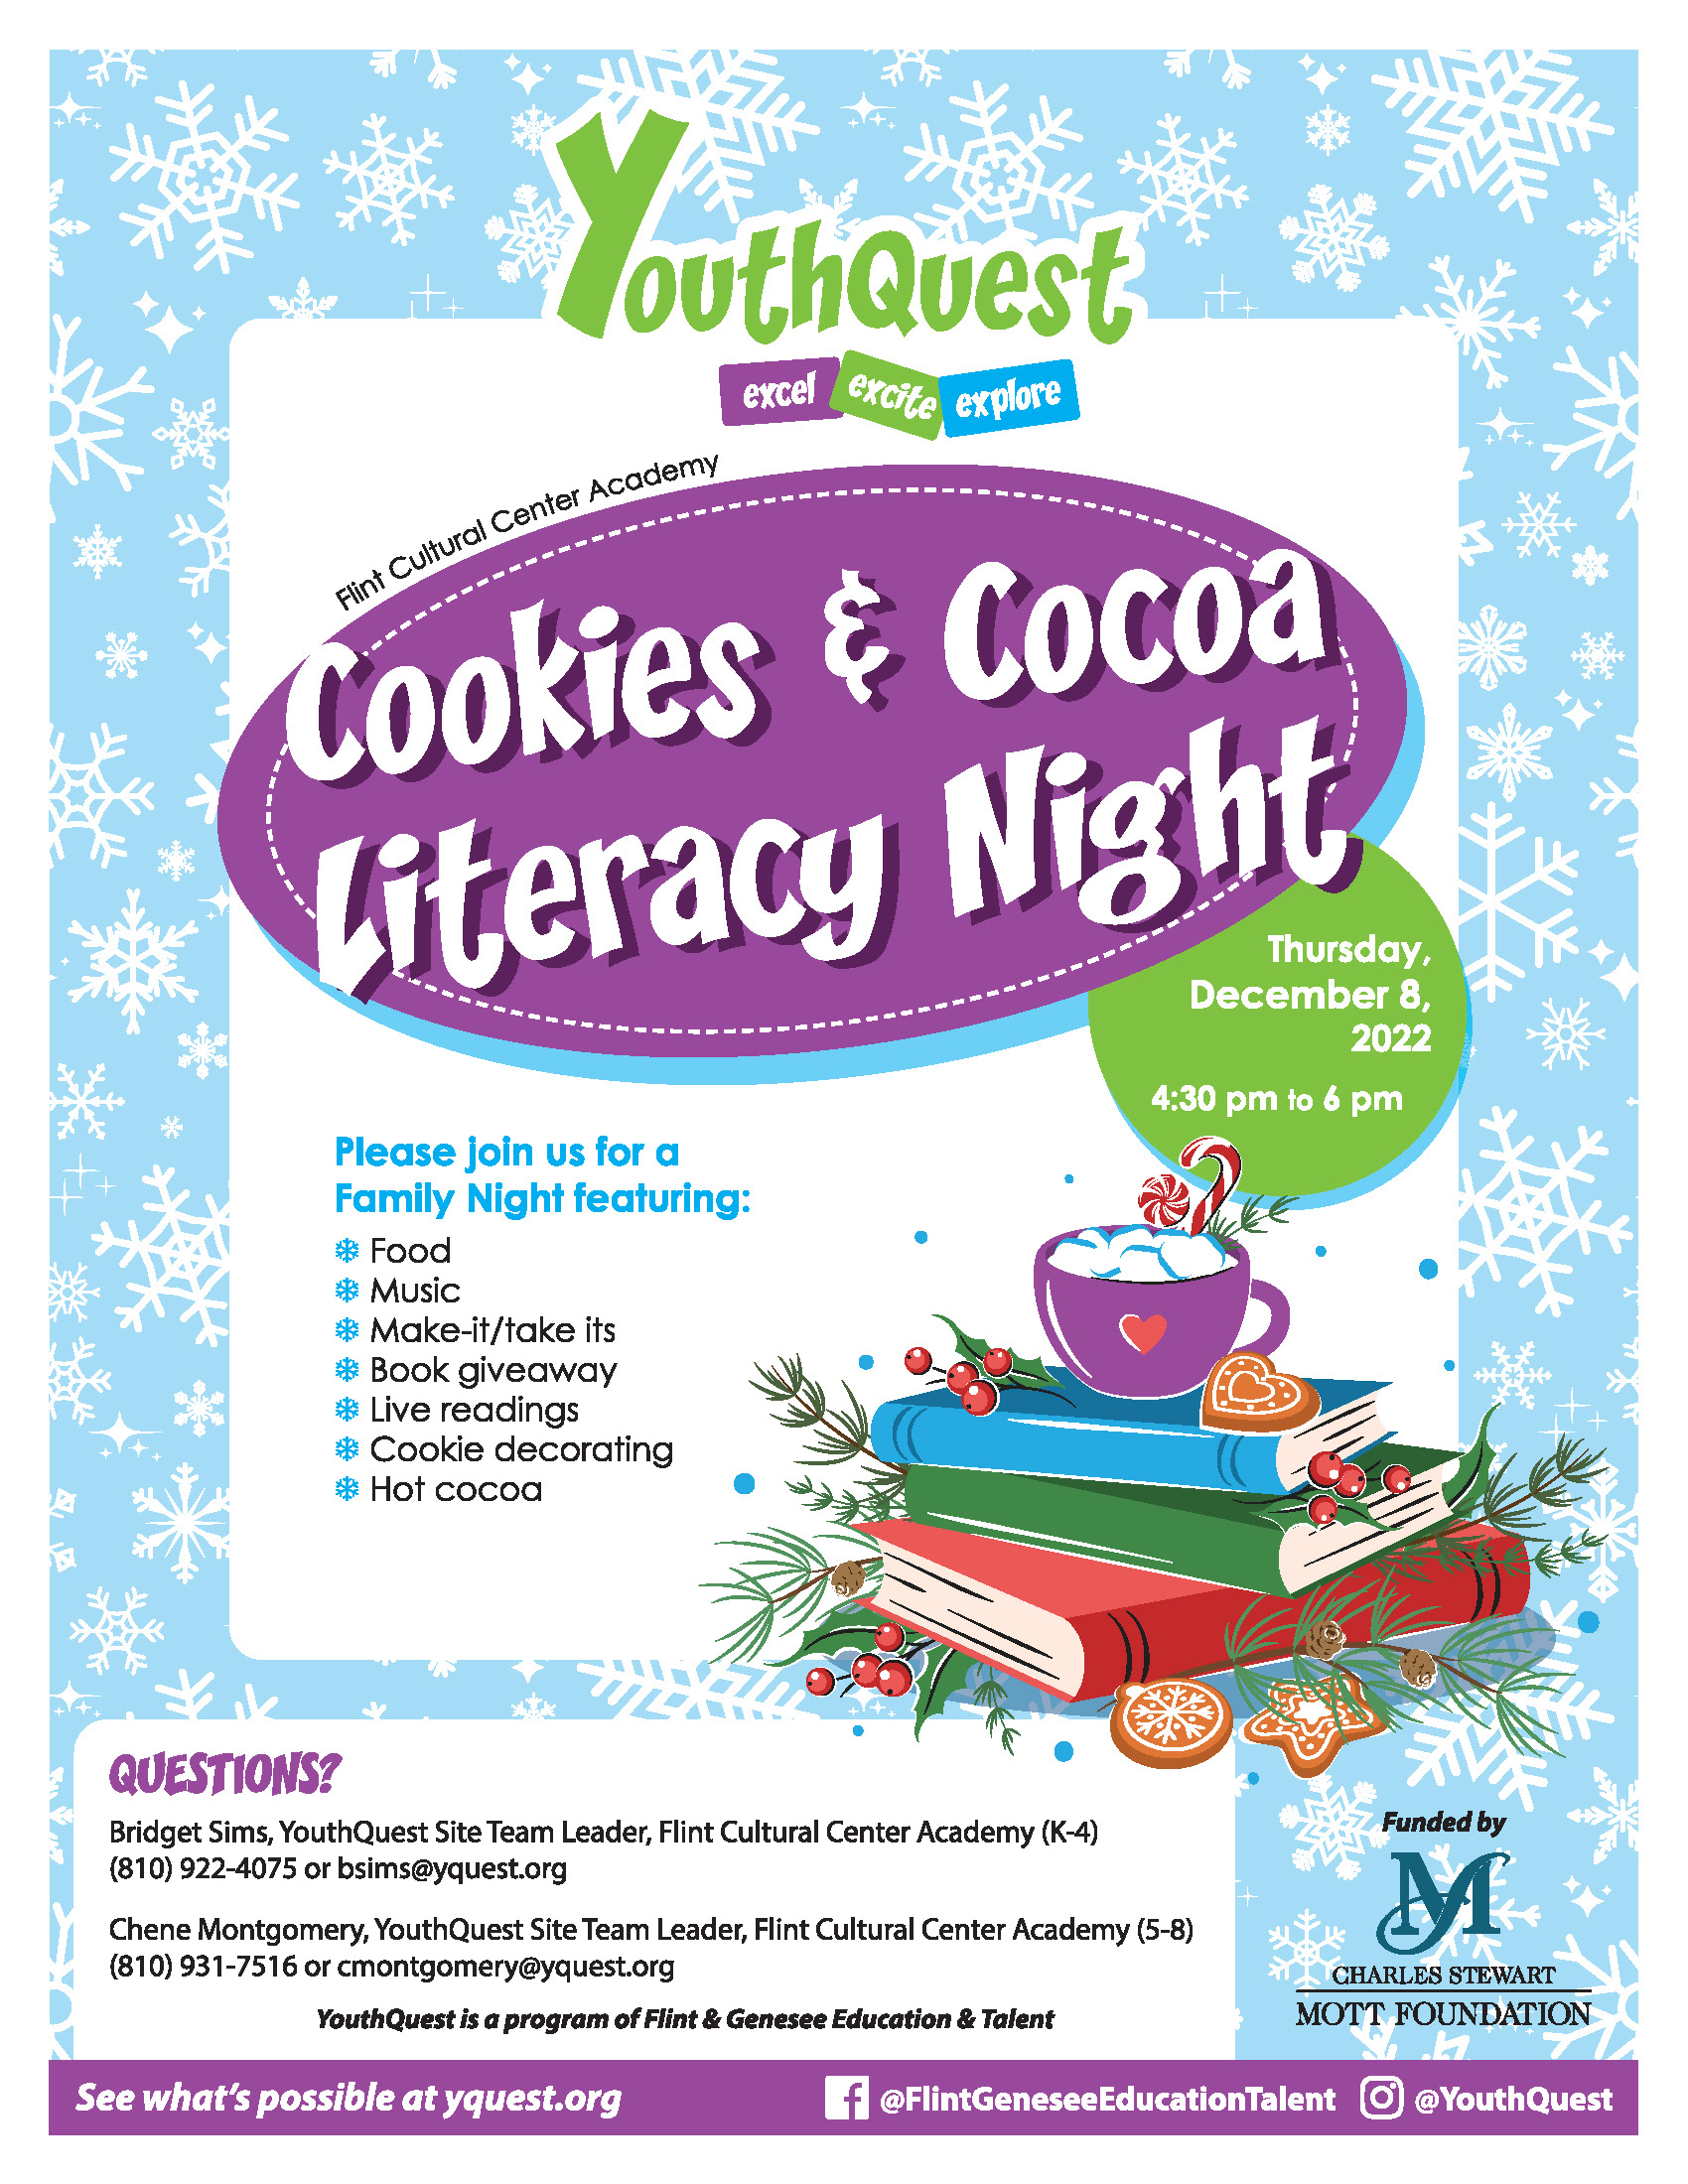 Cookies and Cocoa Literacy Night at Flint Cultural Center Academy